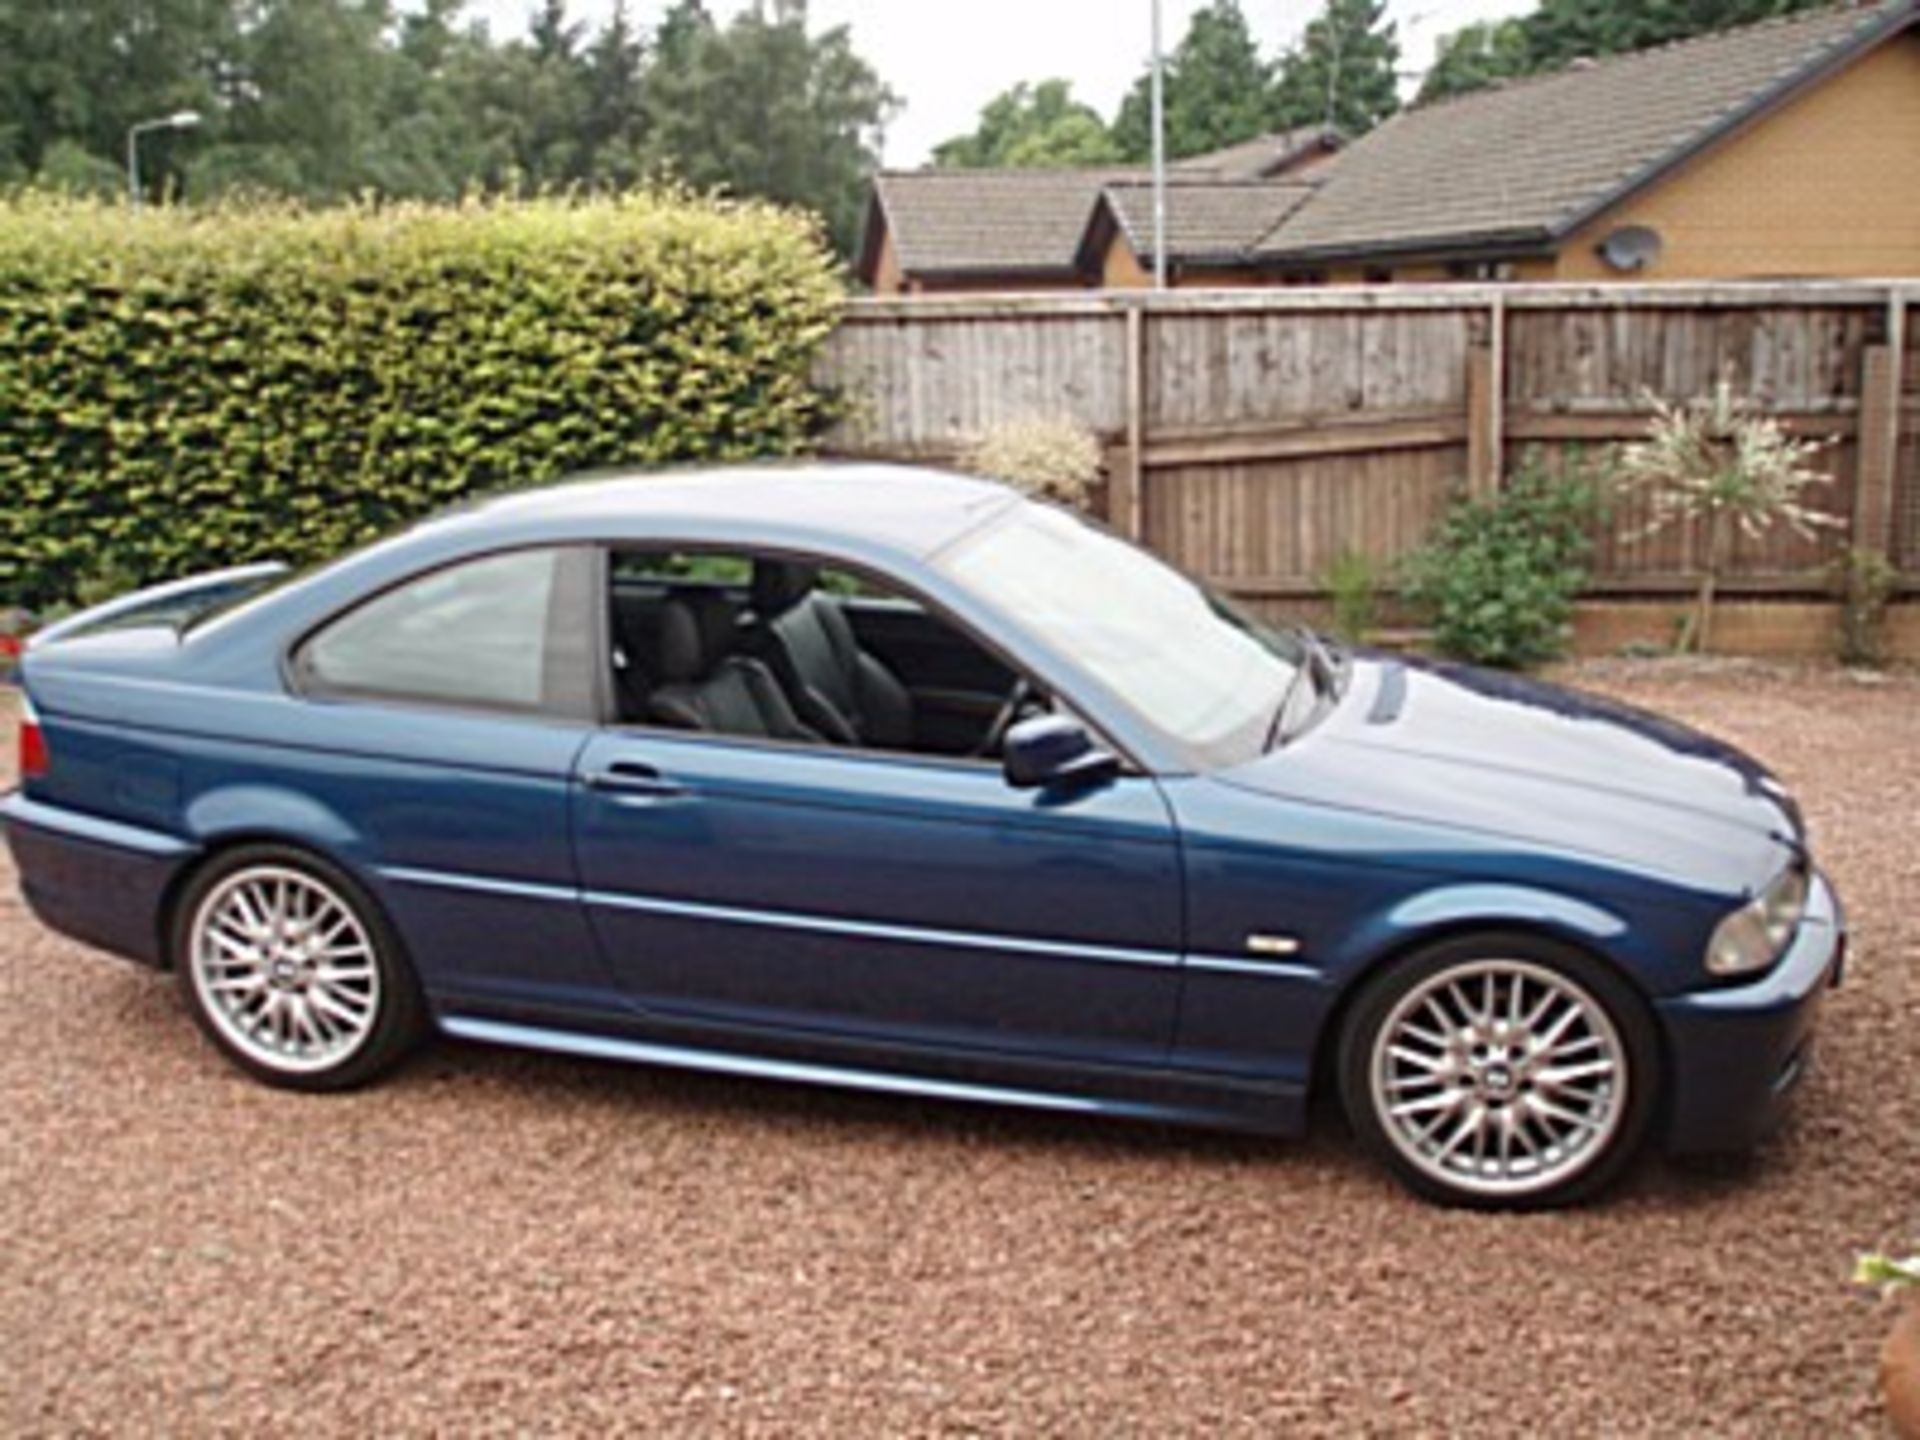 BMW, 330 CI SPORT - 2979cc, Chassis number WBABN52010JU61803 - supplied by Holland Park on March - Image 3 of 9